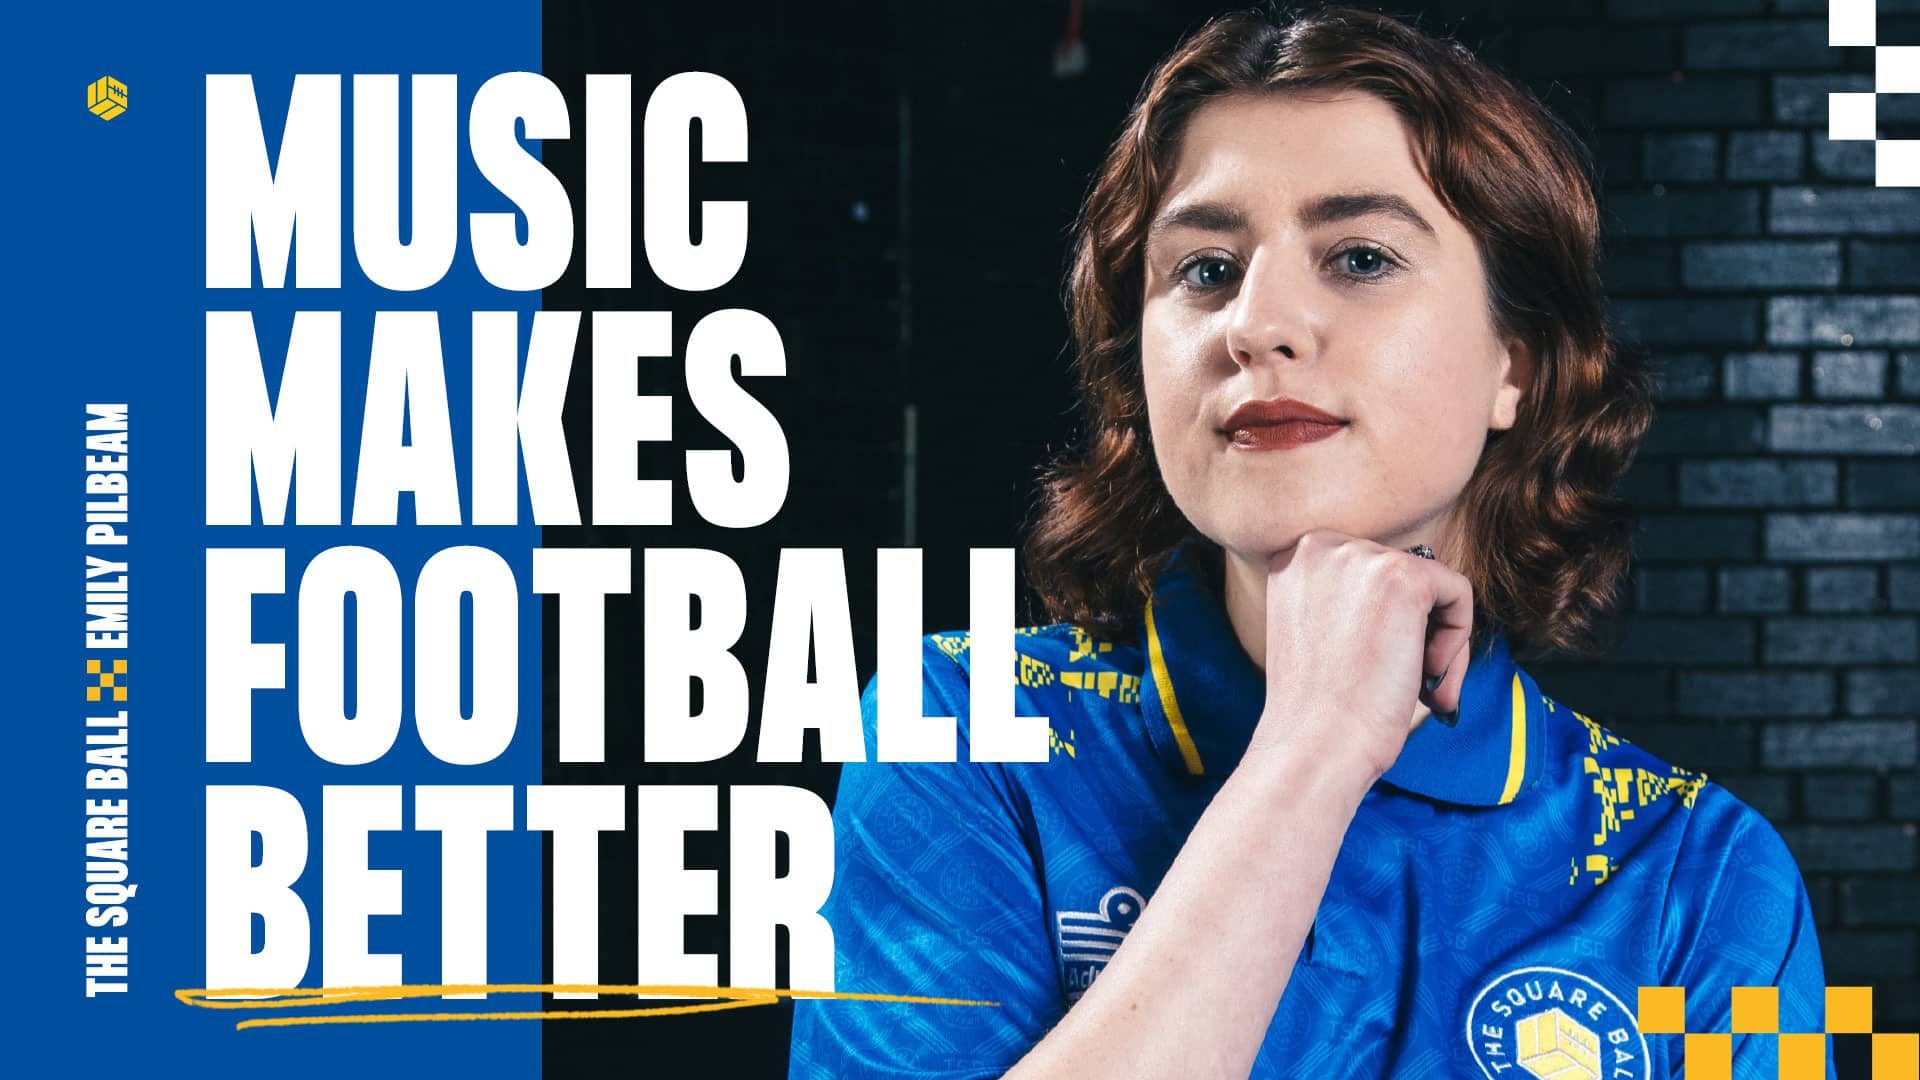 MUSIC MAKES FOOTBALL BETTER is the text, next to a photo of DJ Emily Pilbeam wearing a blue TSB Admiral shirt